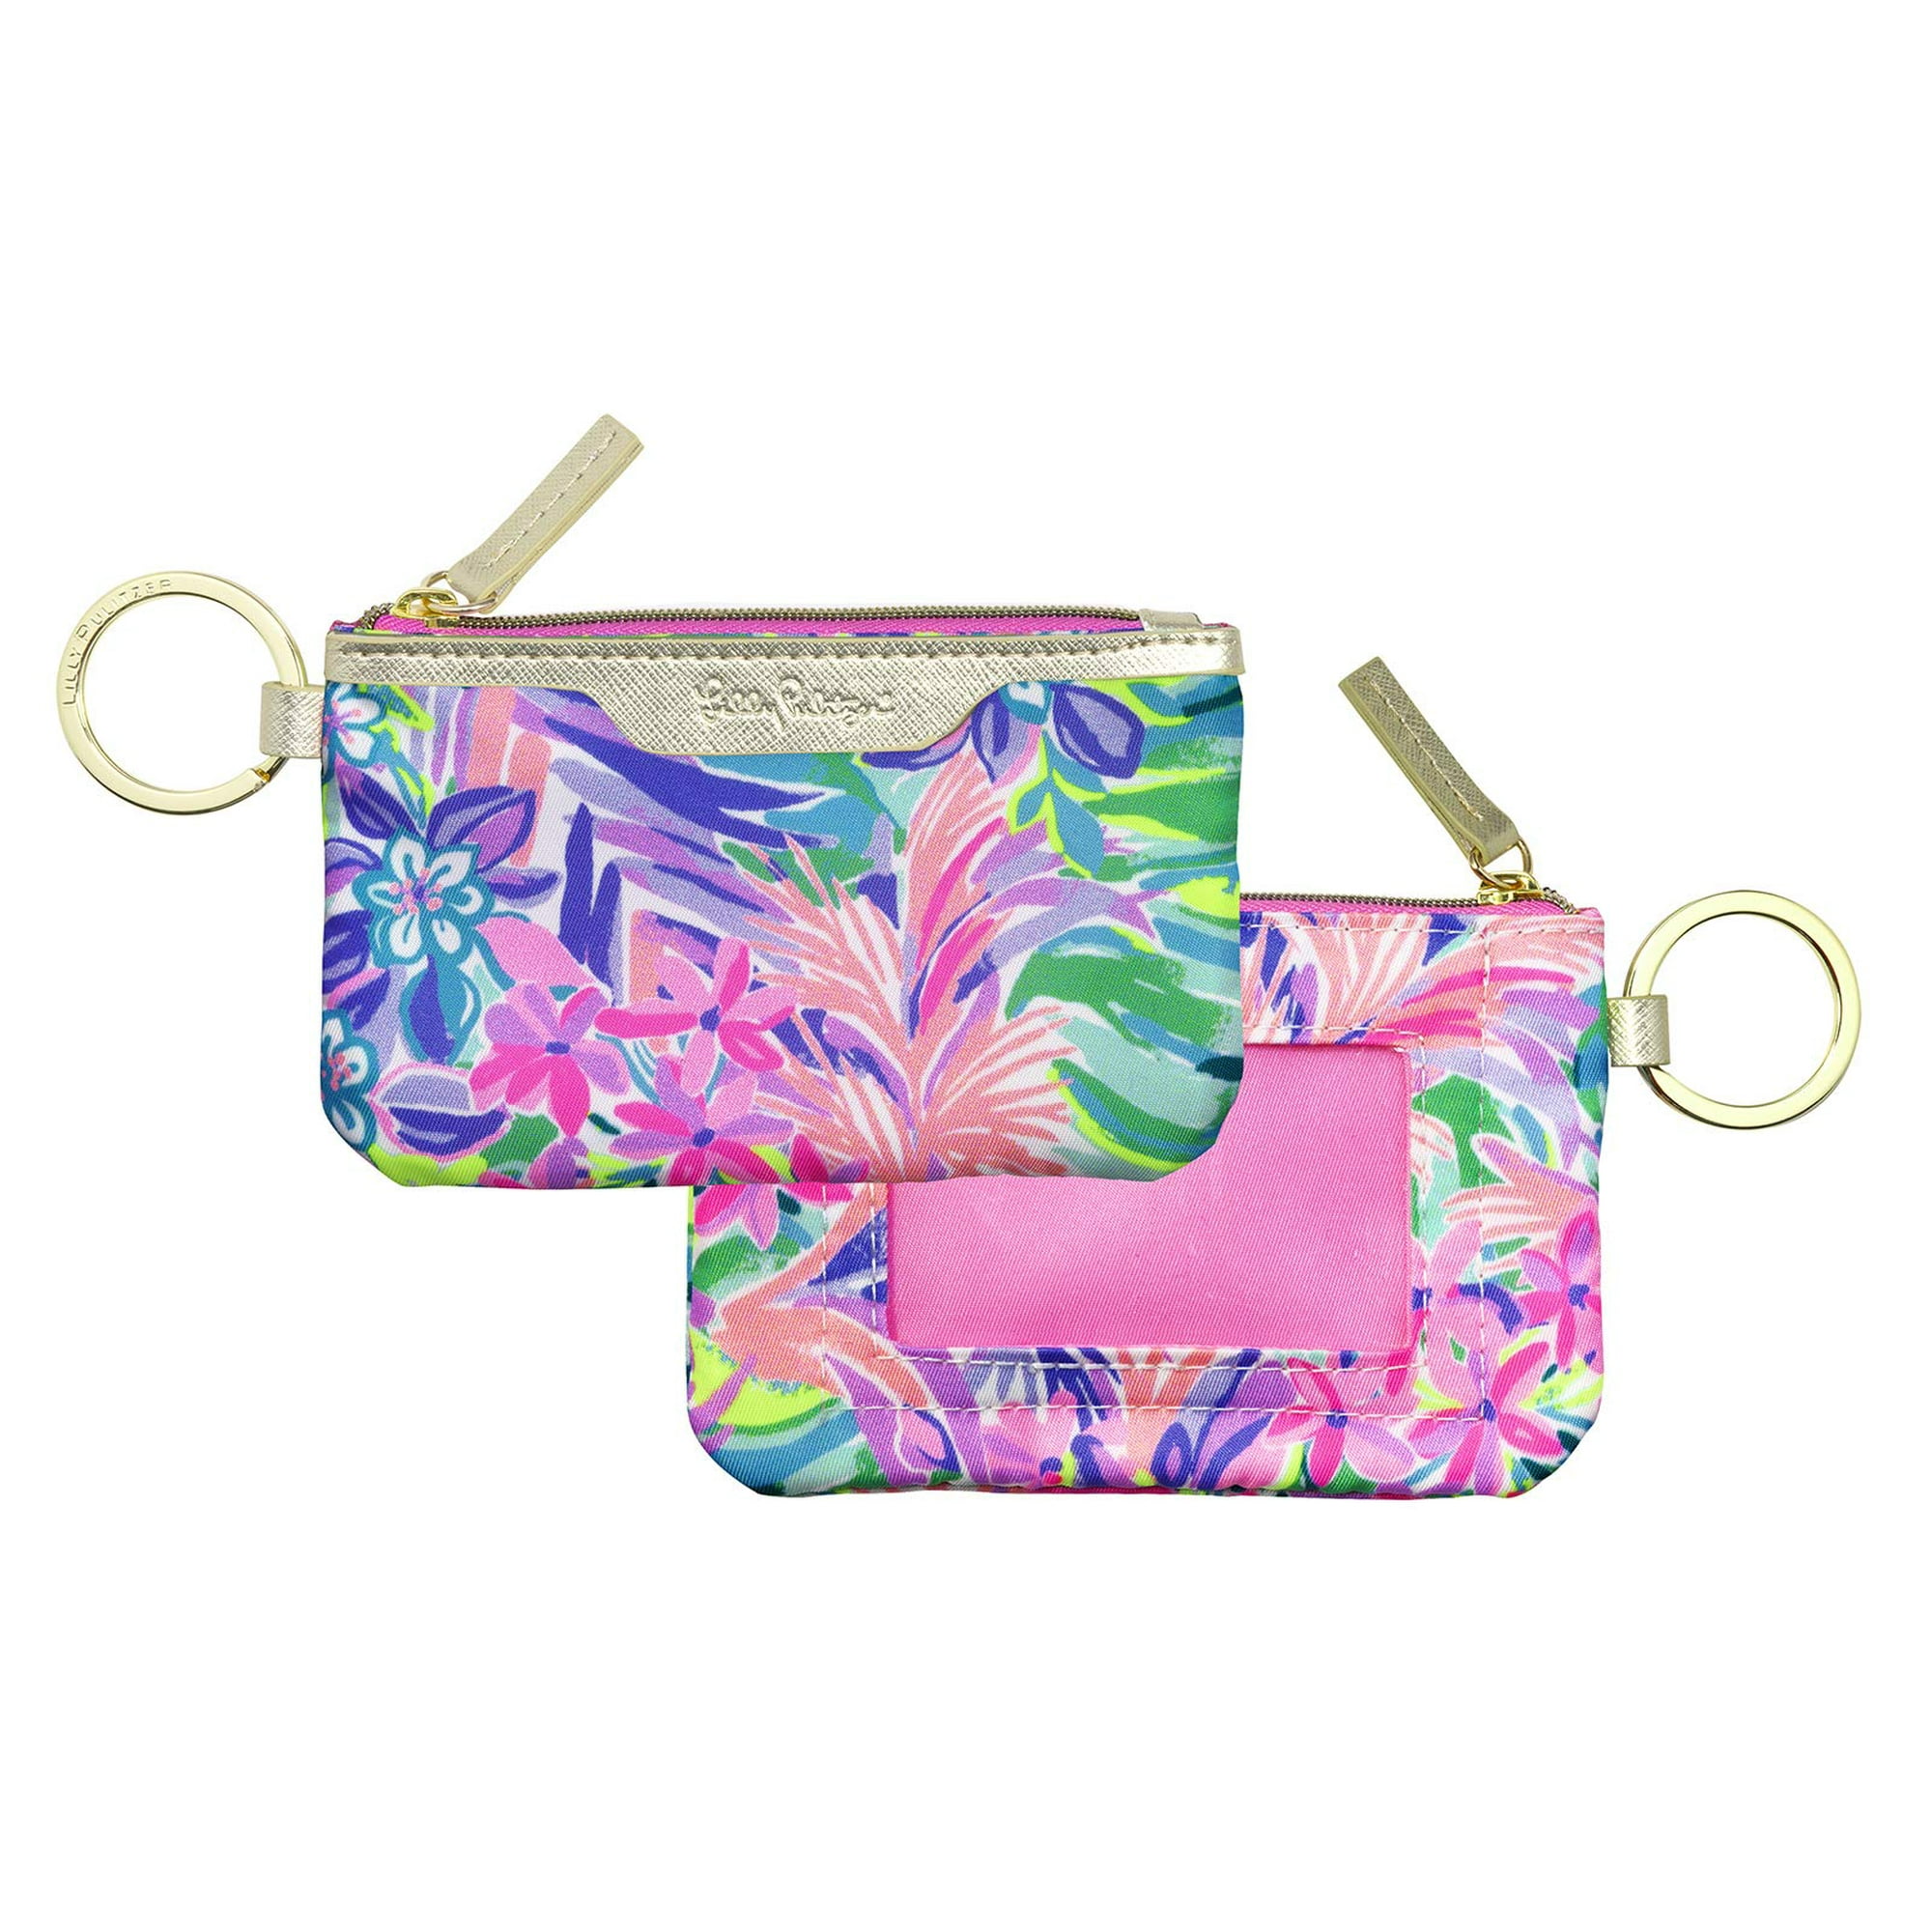 Lilly Pulitzer Lanyard with ID Holder, Keychain Wallet for School or  Office, Gold Zipper Wallet, Bad…See more Lilly Pulitzer Lanyard with ID  Holder